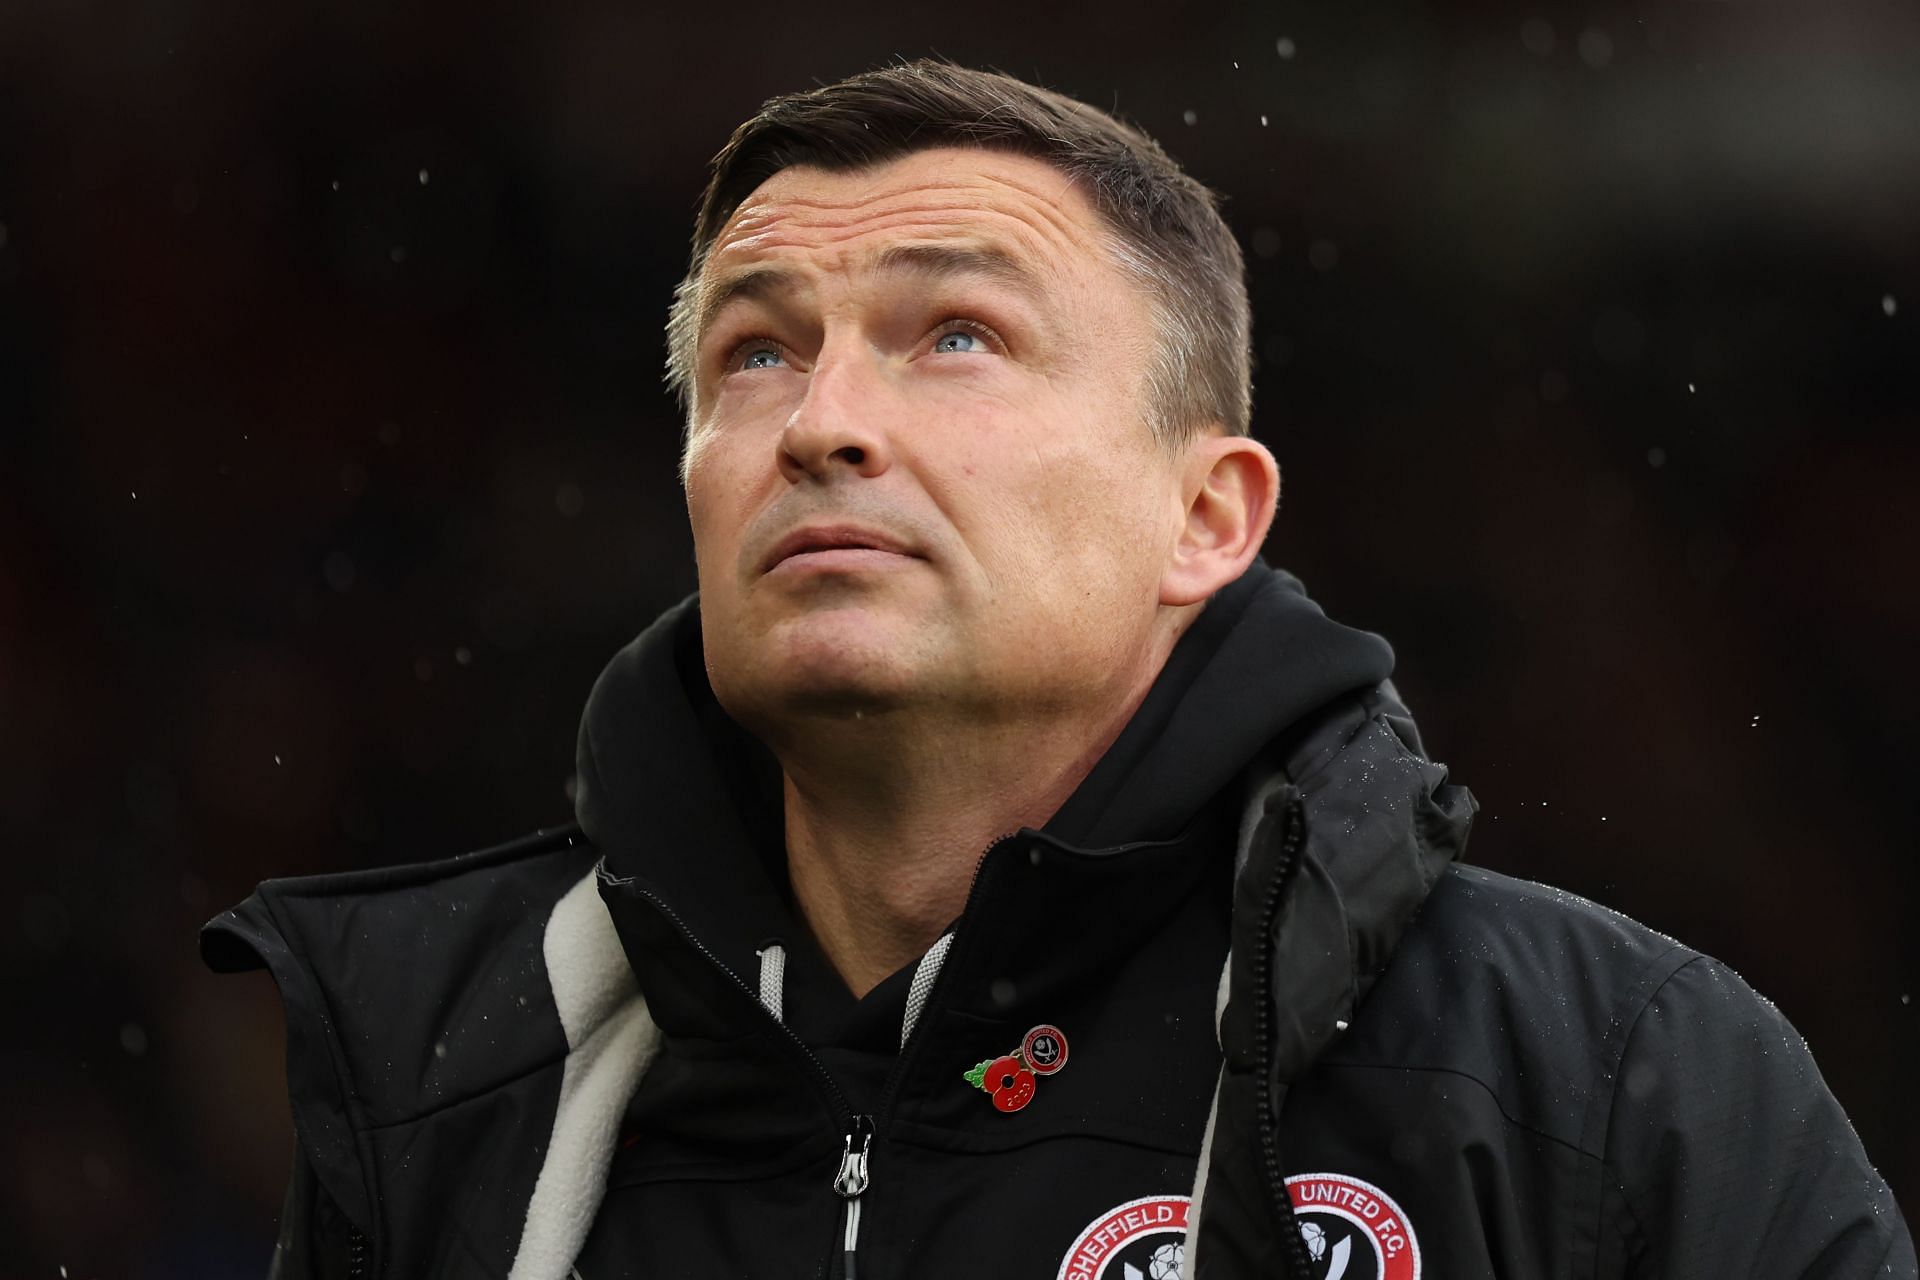 Sheffield United will be hoping for a crucial home win against Bournemouth